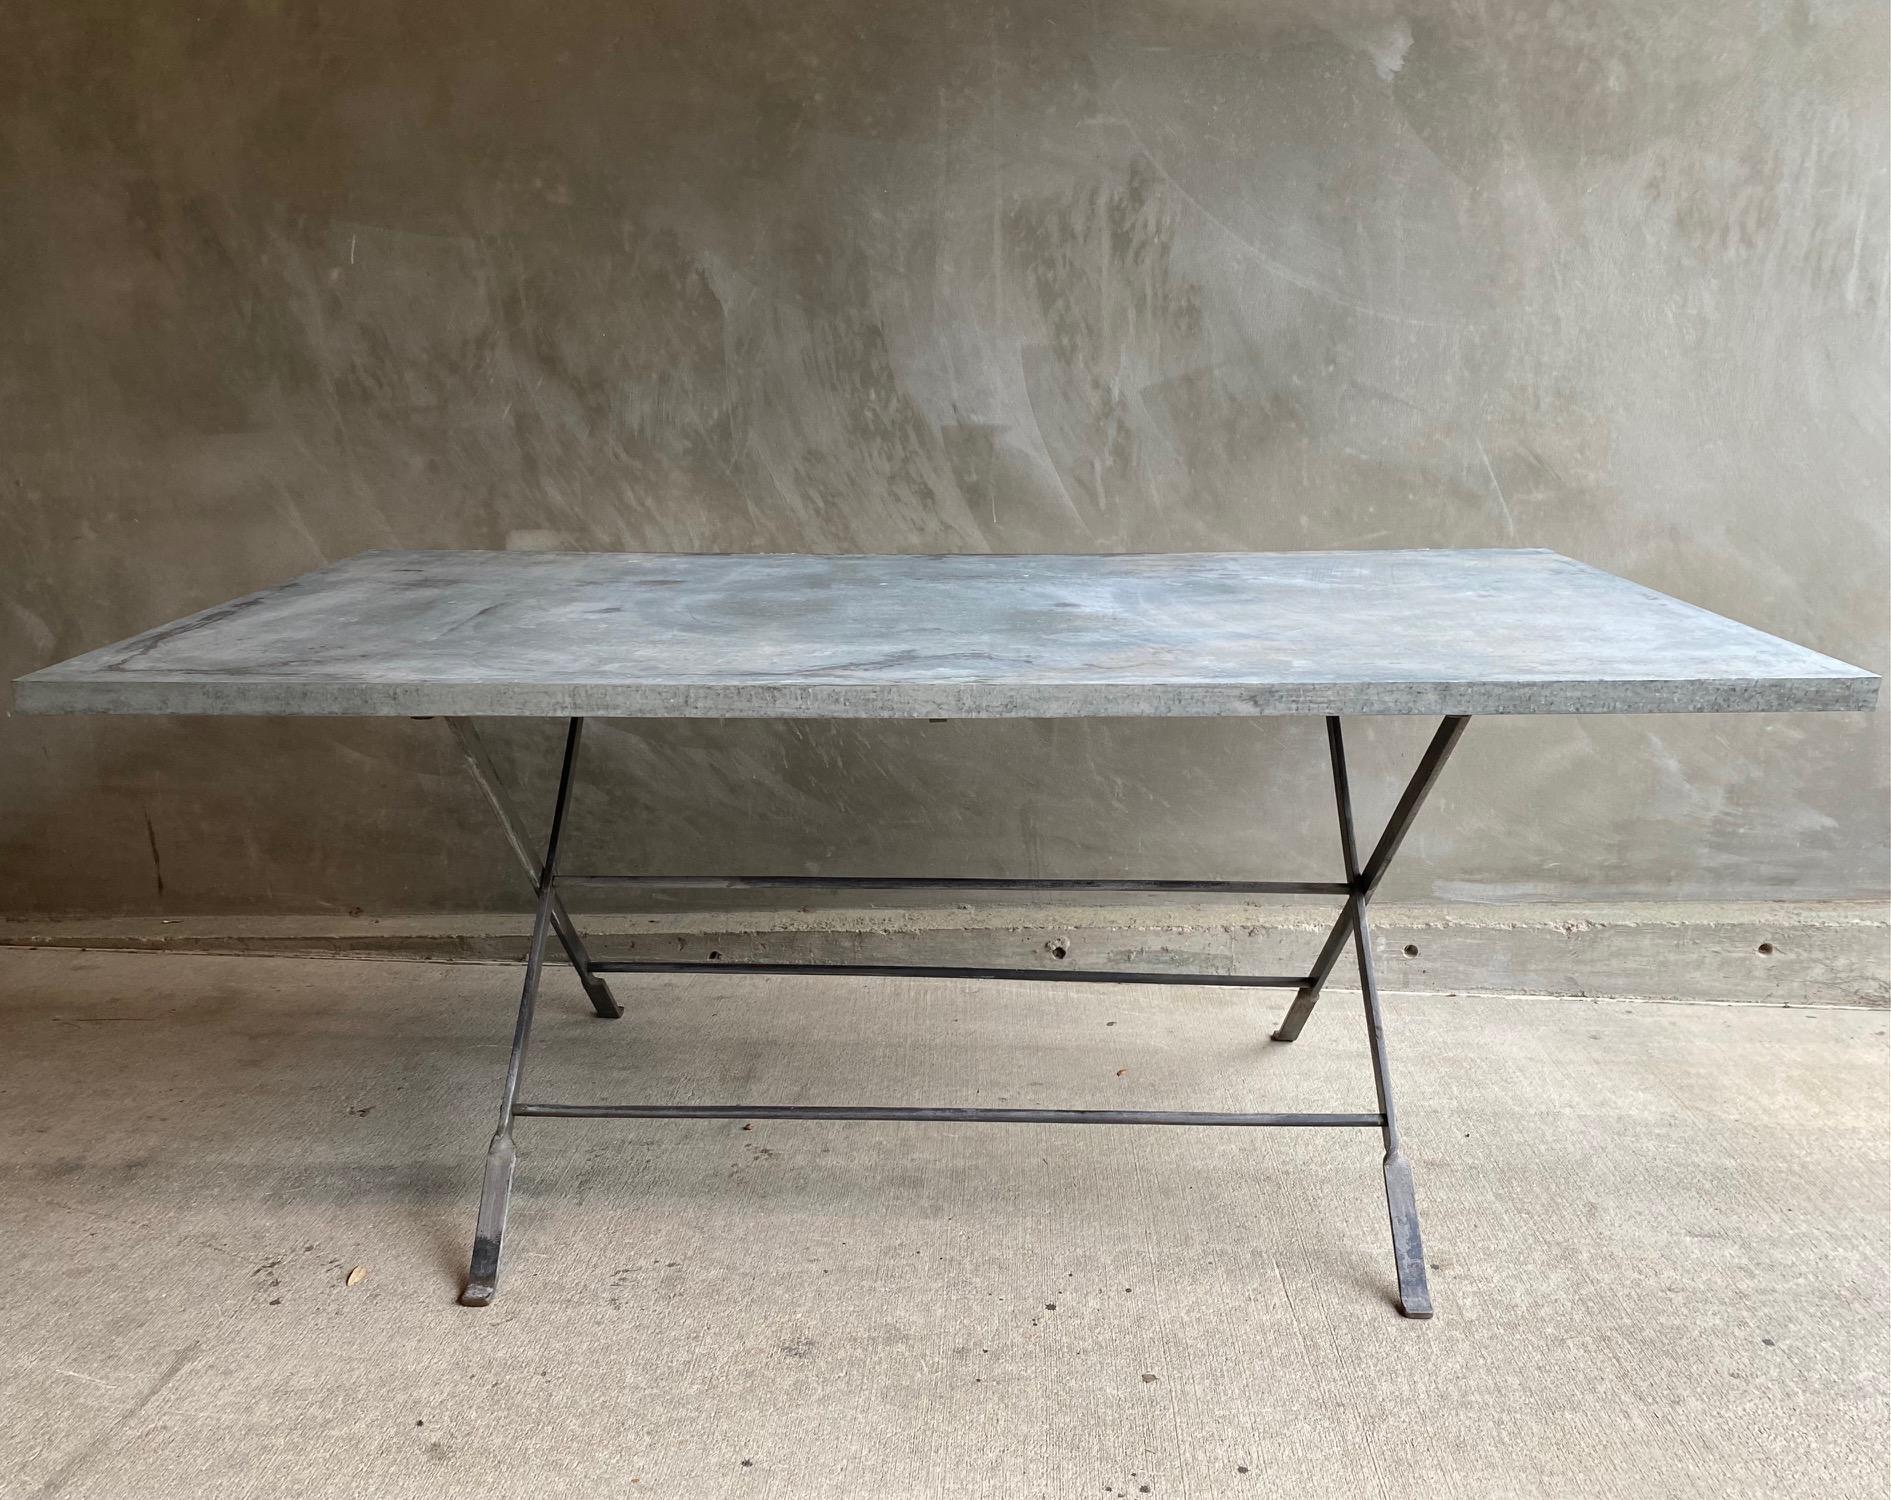 Zinc wrapped dining table top on iron X shape trestle base. Zinc top shows natural patina and variation to the surface. Heavy weight table is very sturdy and appropriate for a primary dining table. Convenient folding mechanism allows for easy